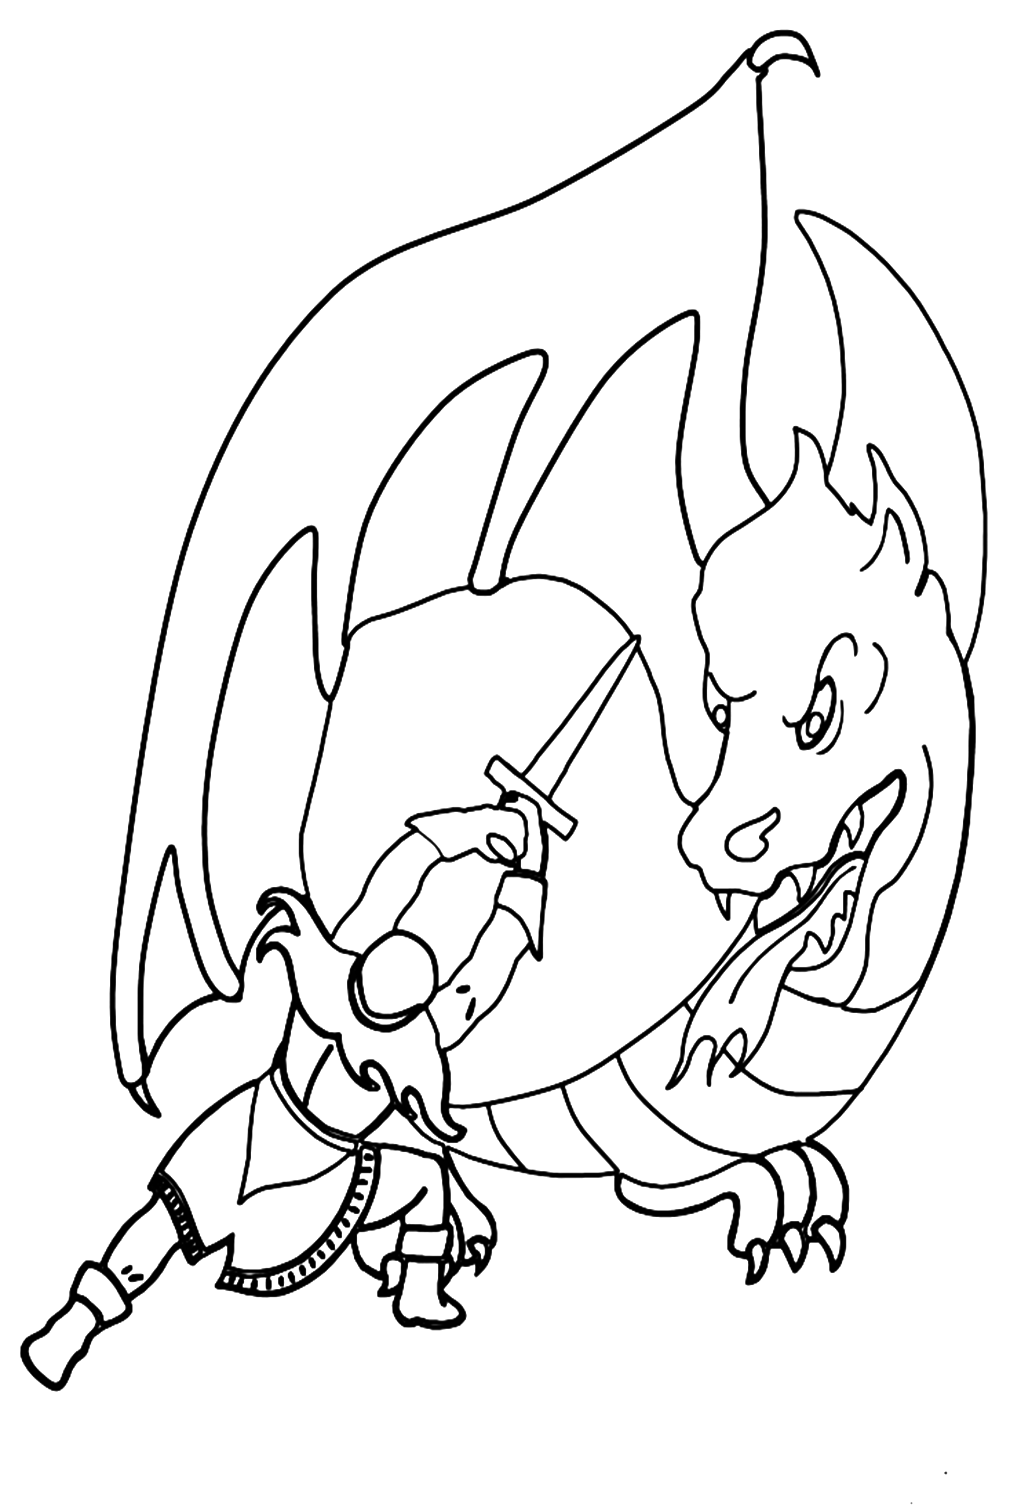 Dragon Battle Picture To Color Coloring Page